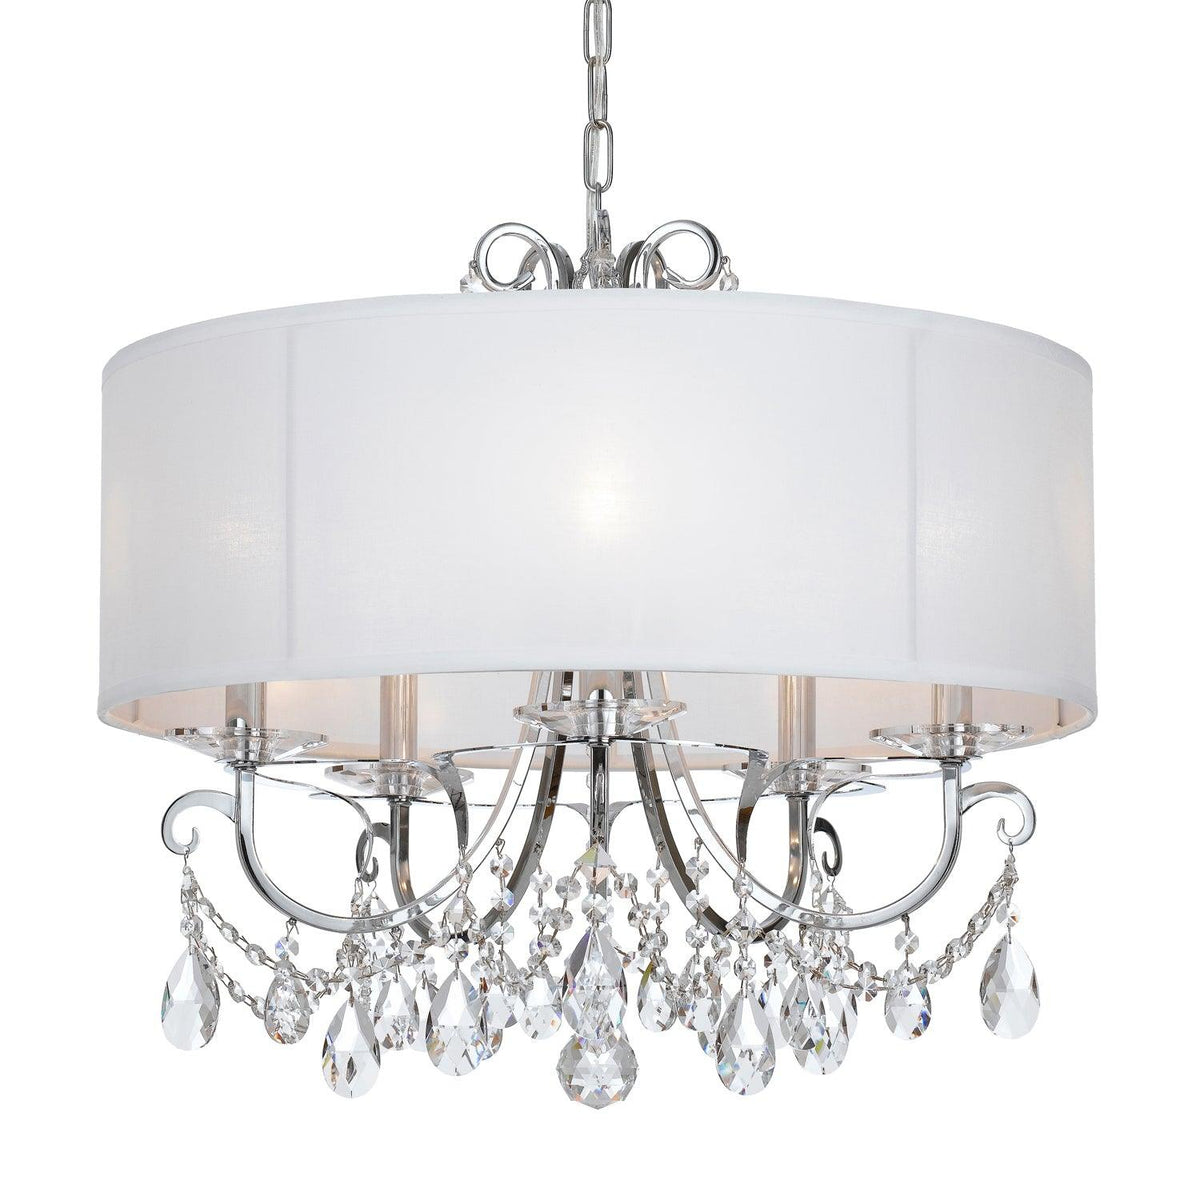 Crystorama - Othello Drum Shade Chandelier - 6625-CH-CL-MWP | Montreal Lighting & Hardware